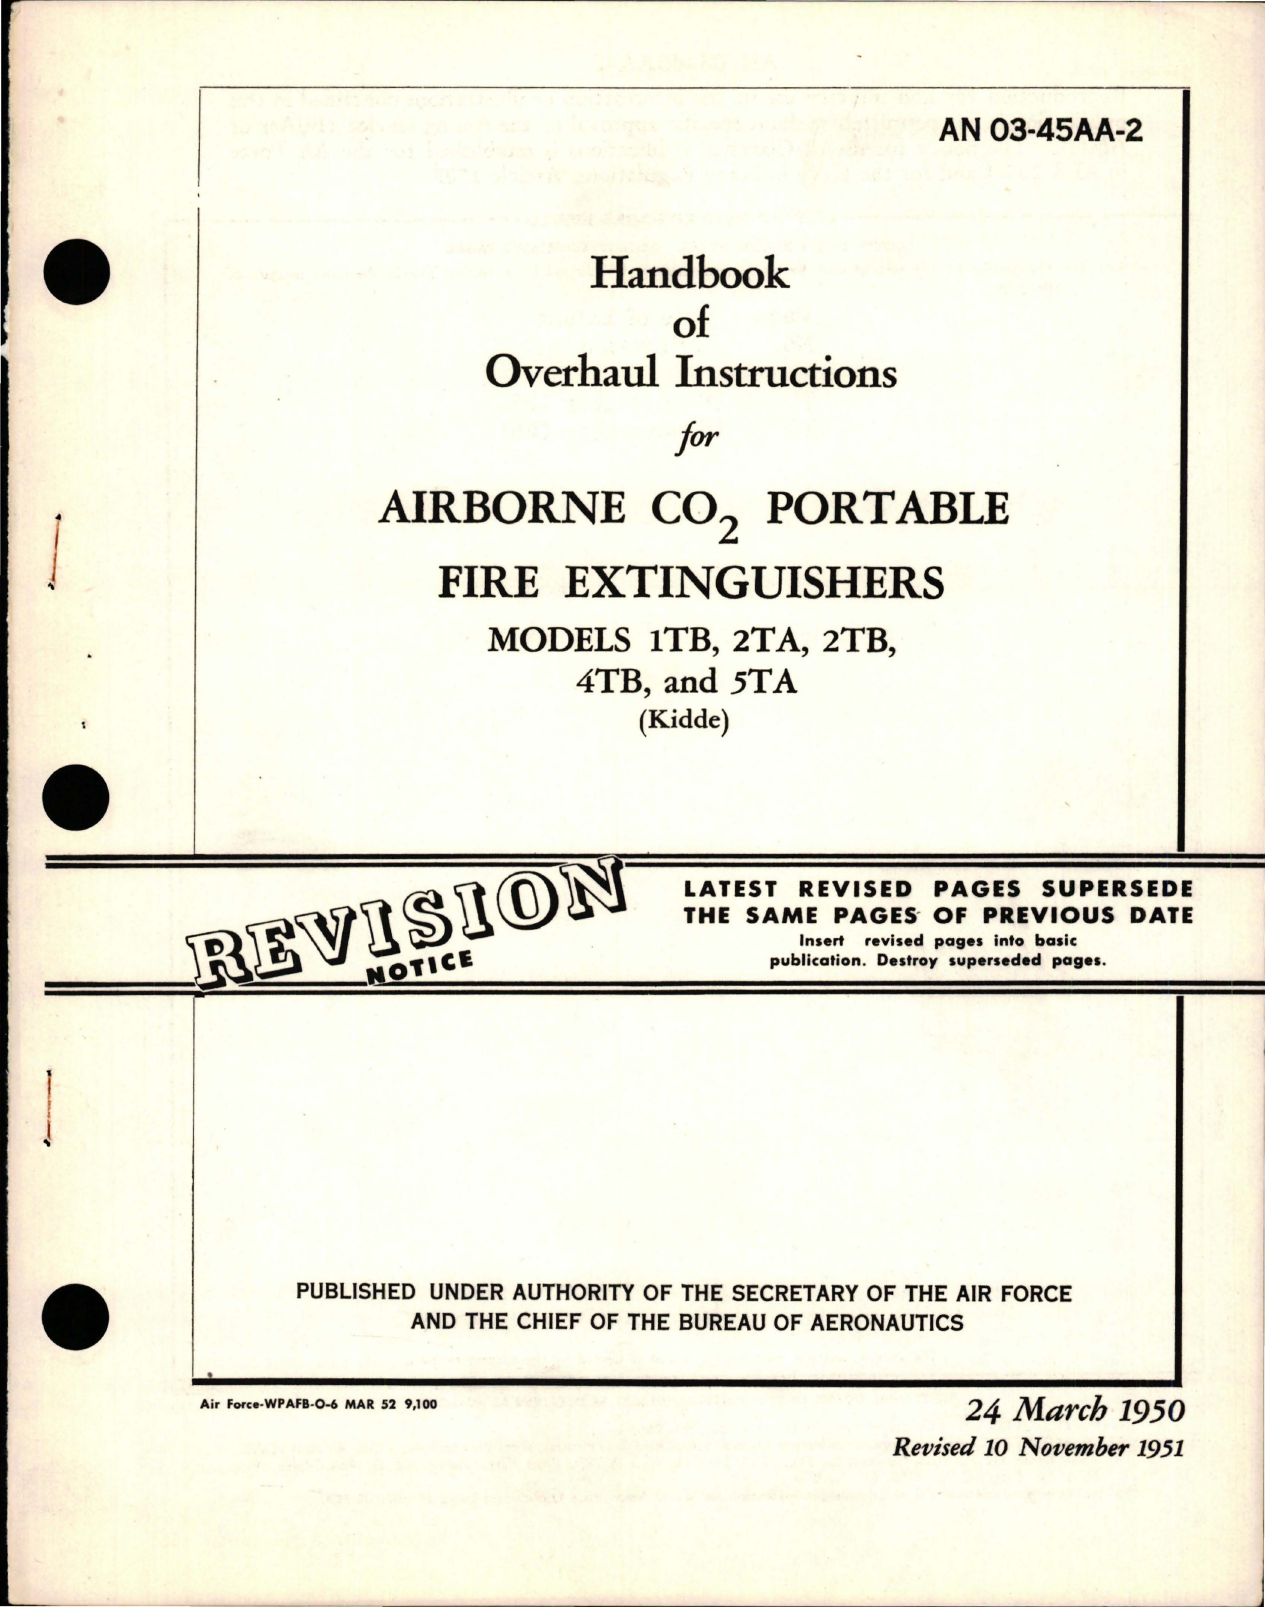 Sample page 1 from AirCorps Library document: Overhaul Instructions for CO2 Portable Fire Extinguishers - Models 1TB, 2TA, 2TB, 4TB, and 5TA